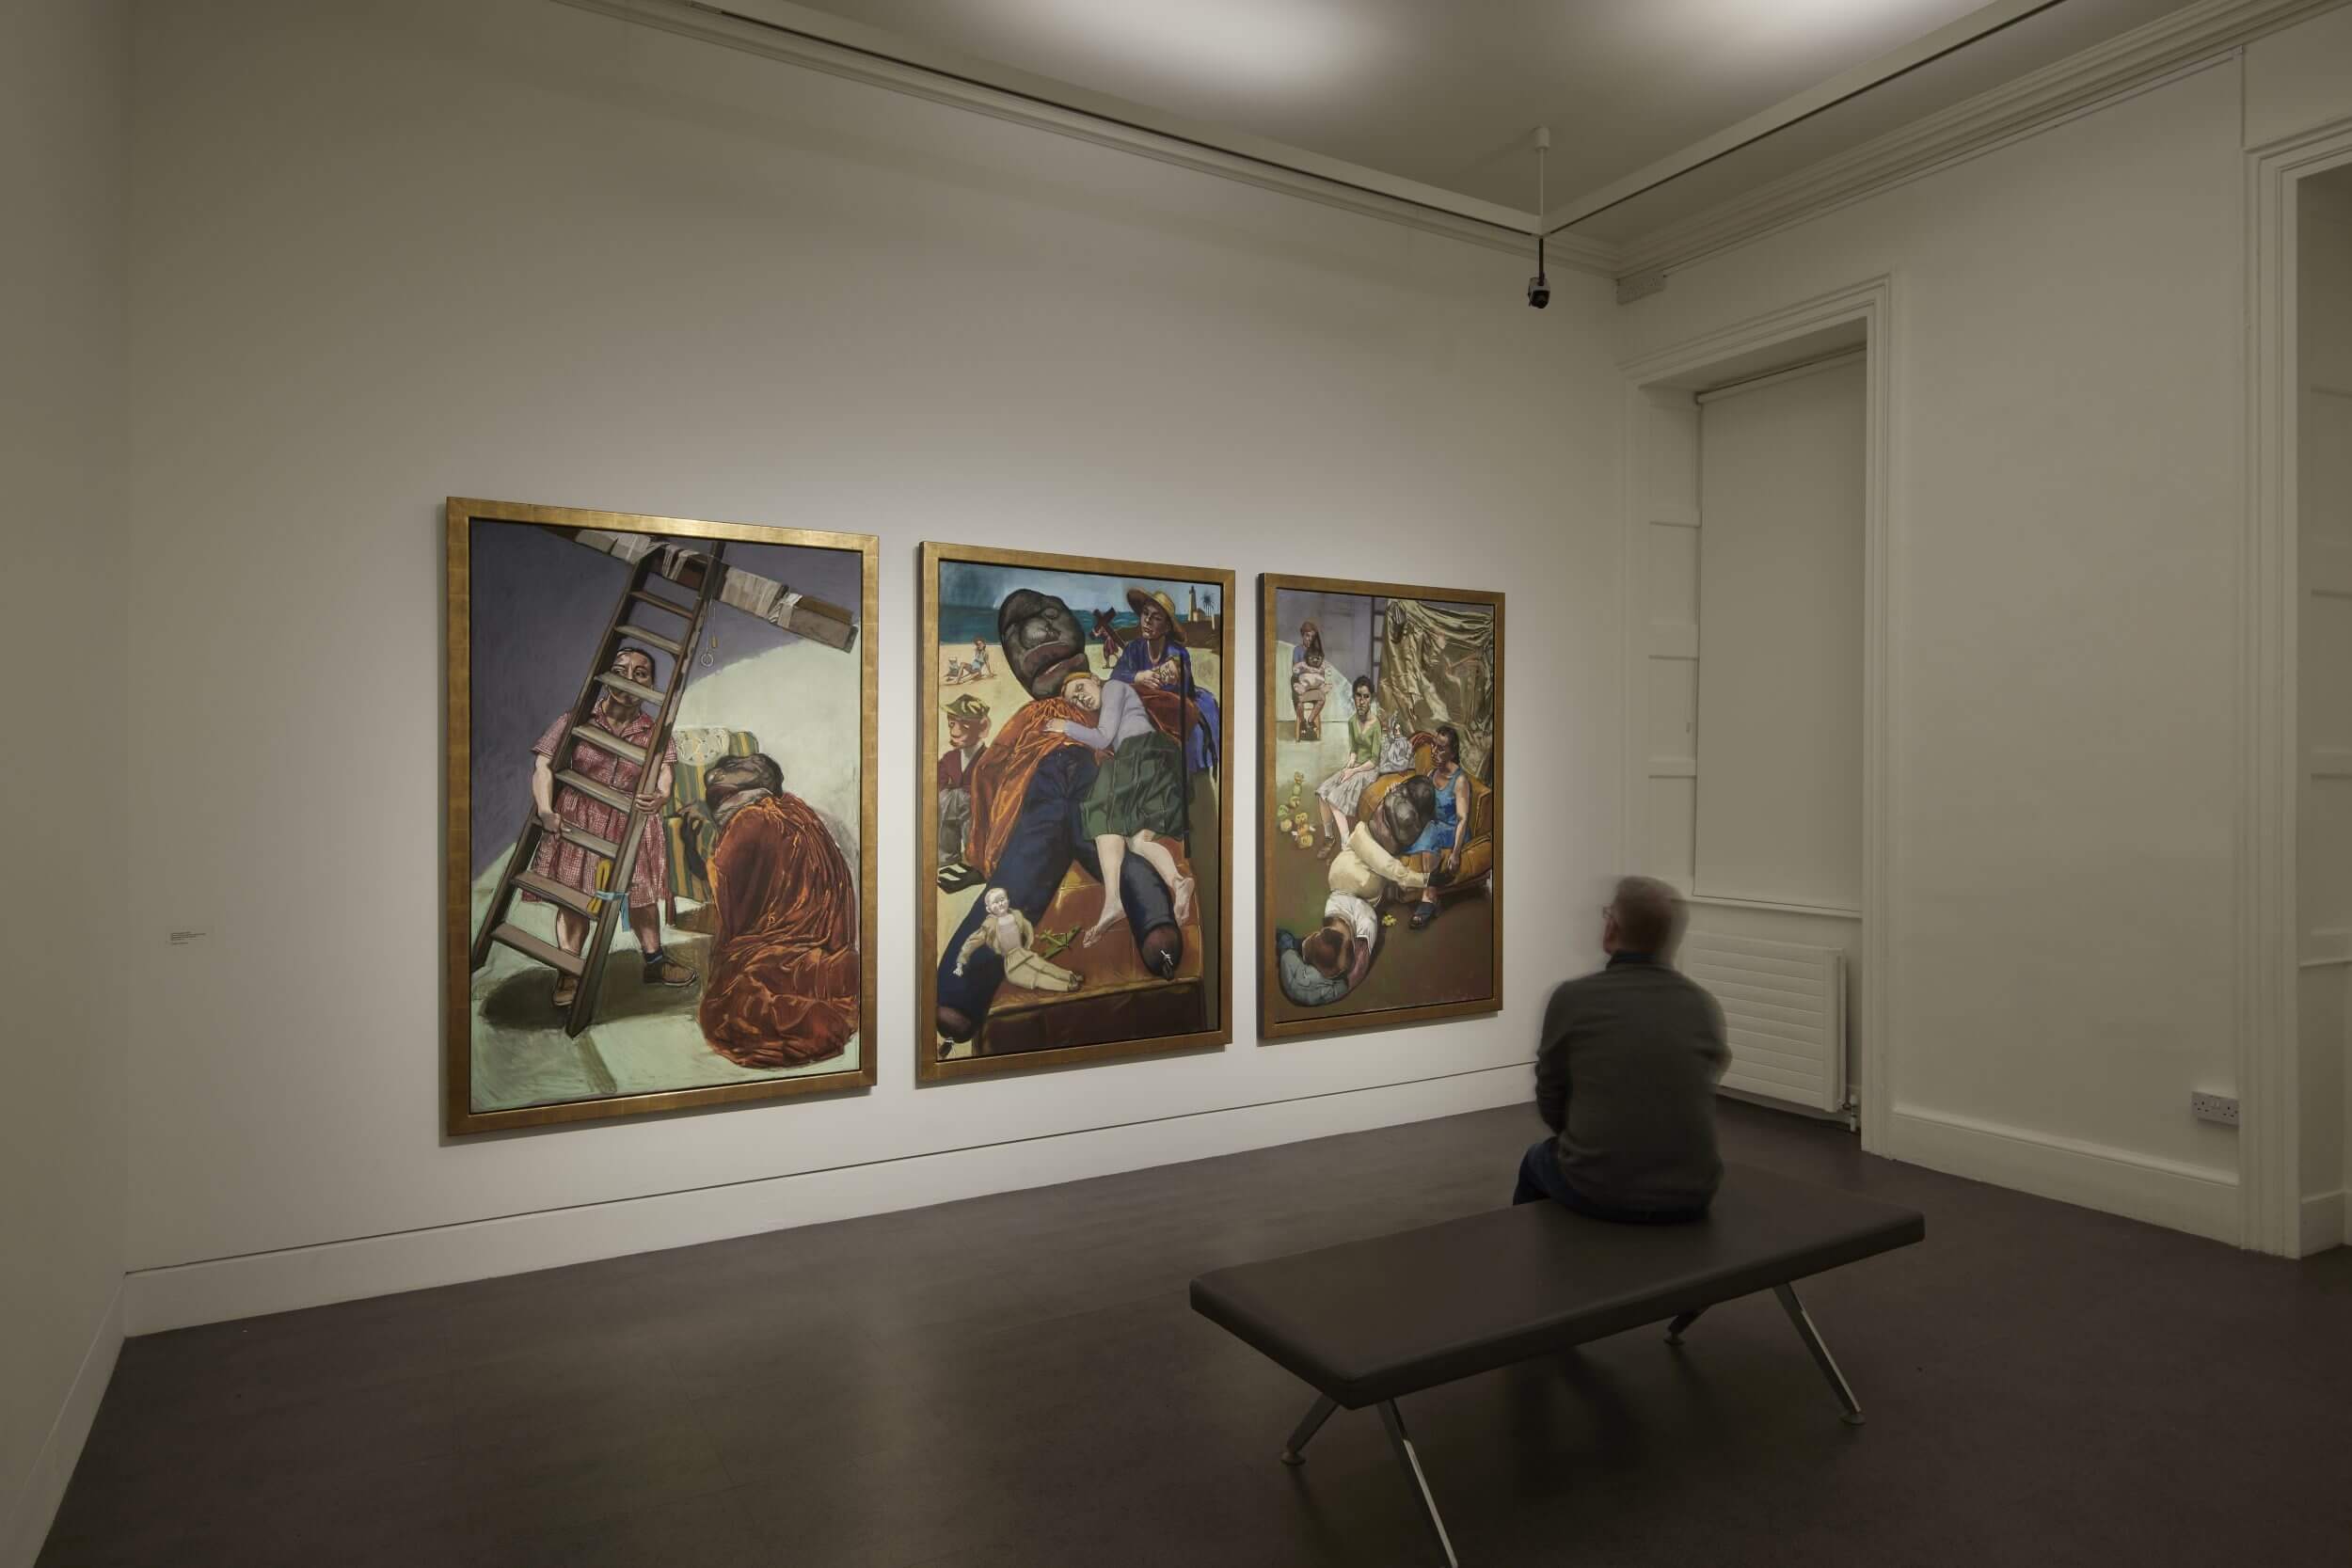 Interior installation photograph inside a gallery room with three large oil paintings on the wall. A person sits on a bench looking at the paintings.